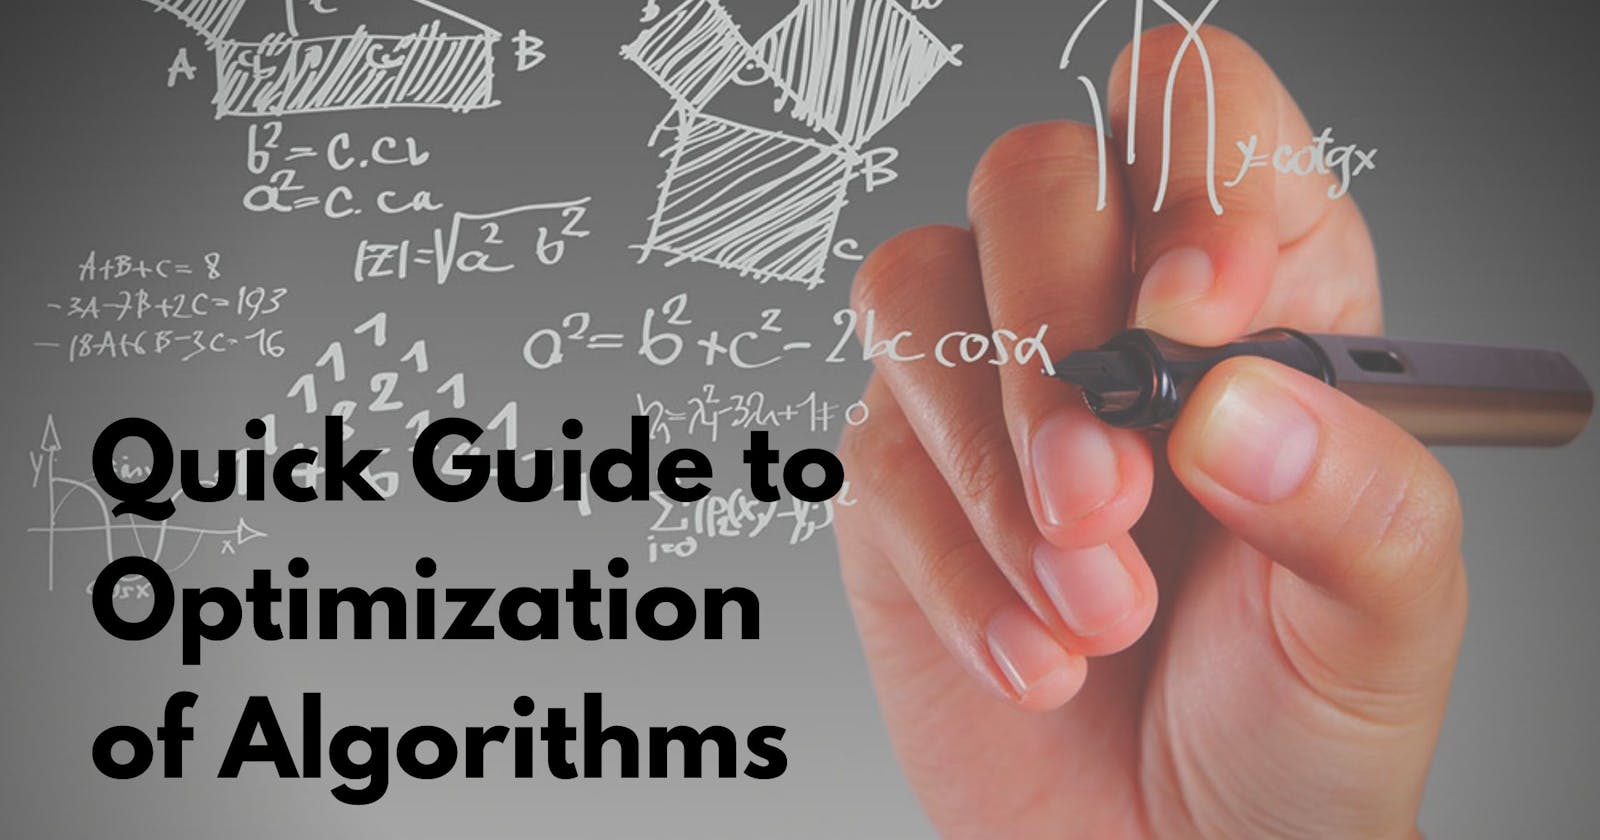 Quick Guide to Optimization of Algorithms